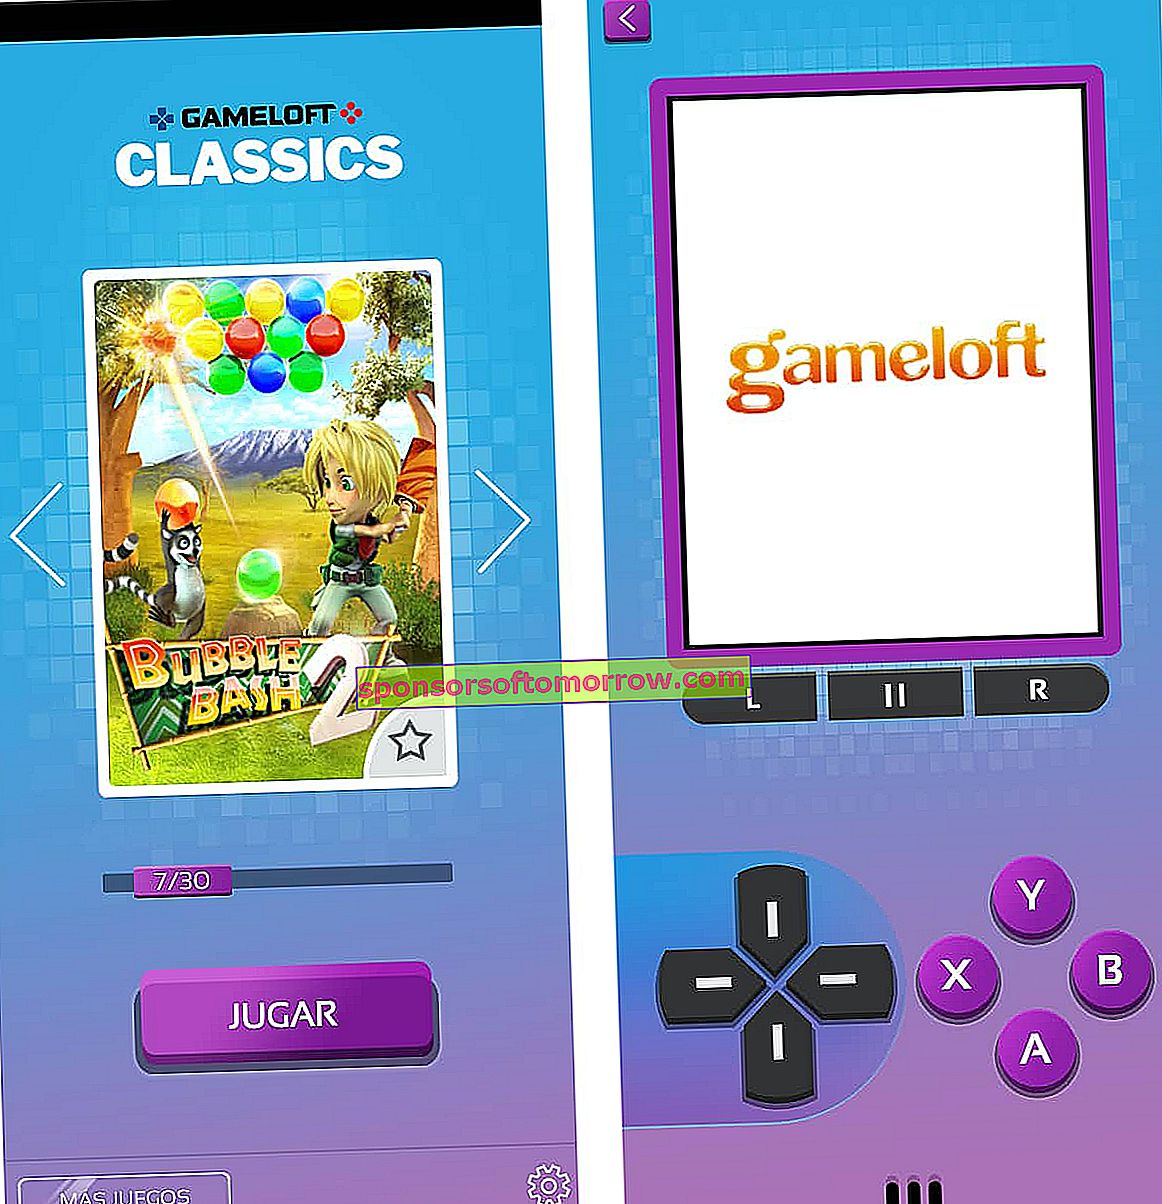 Get free 30 classic games to play from your mobile